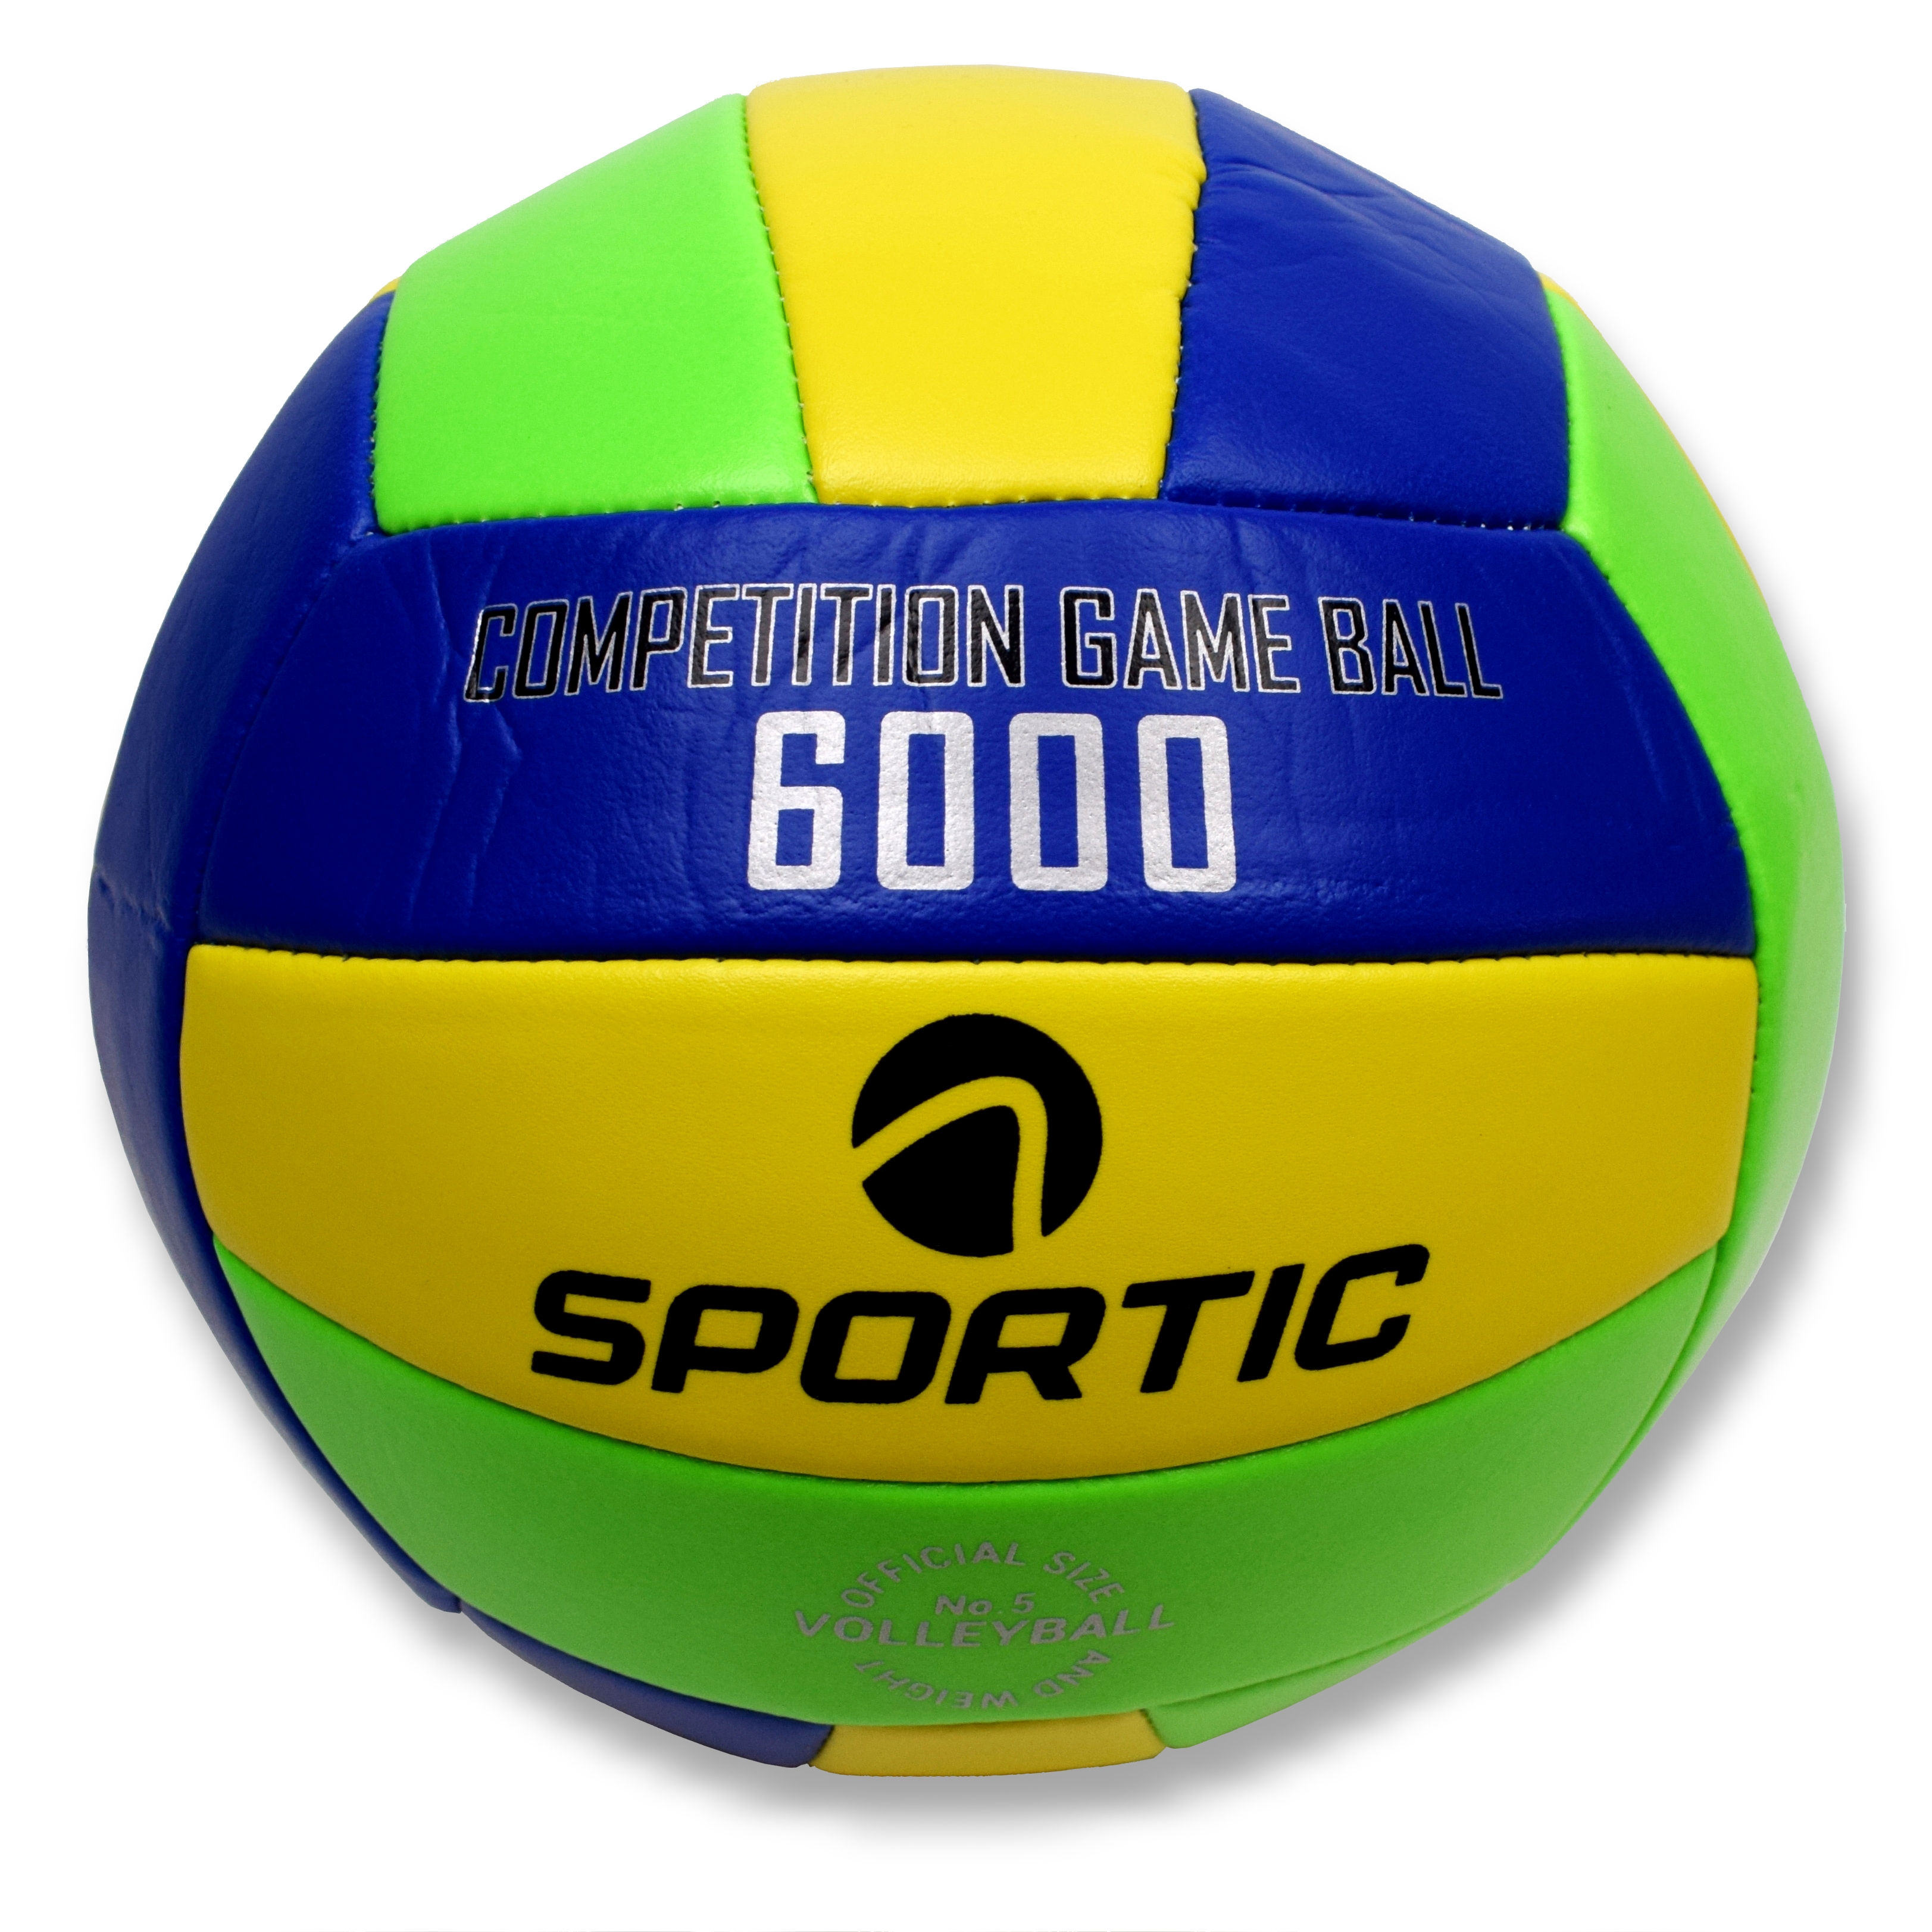 Volleyball, official size and weight